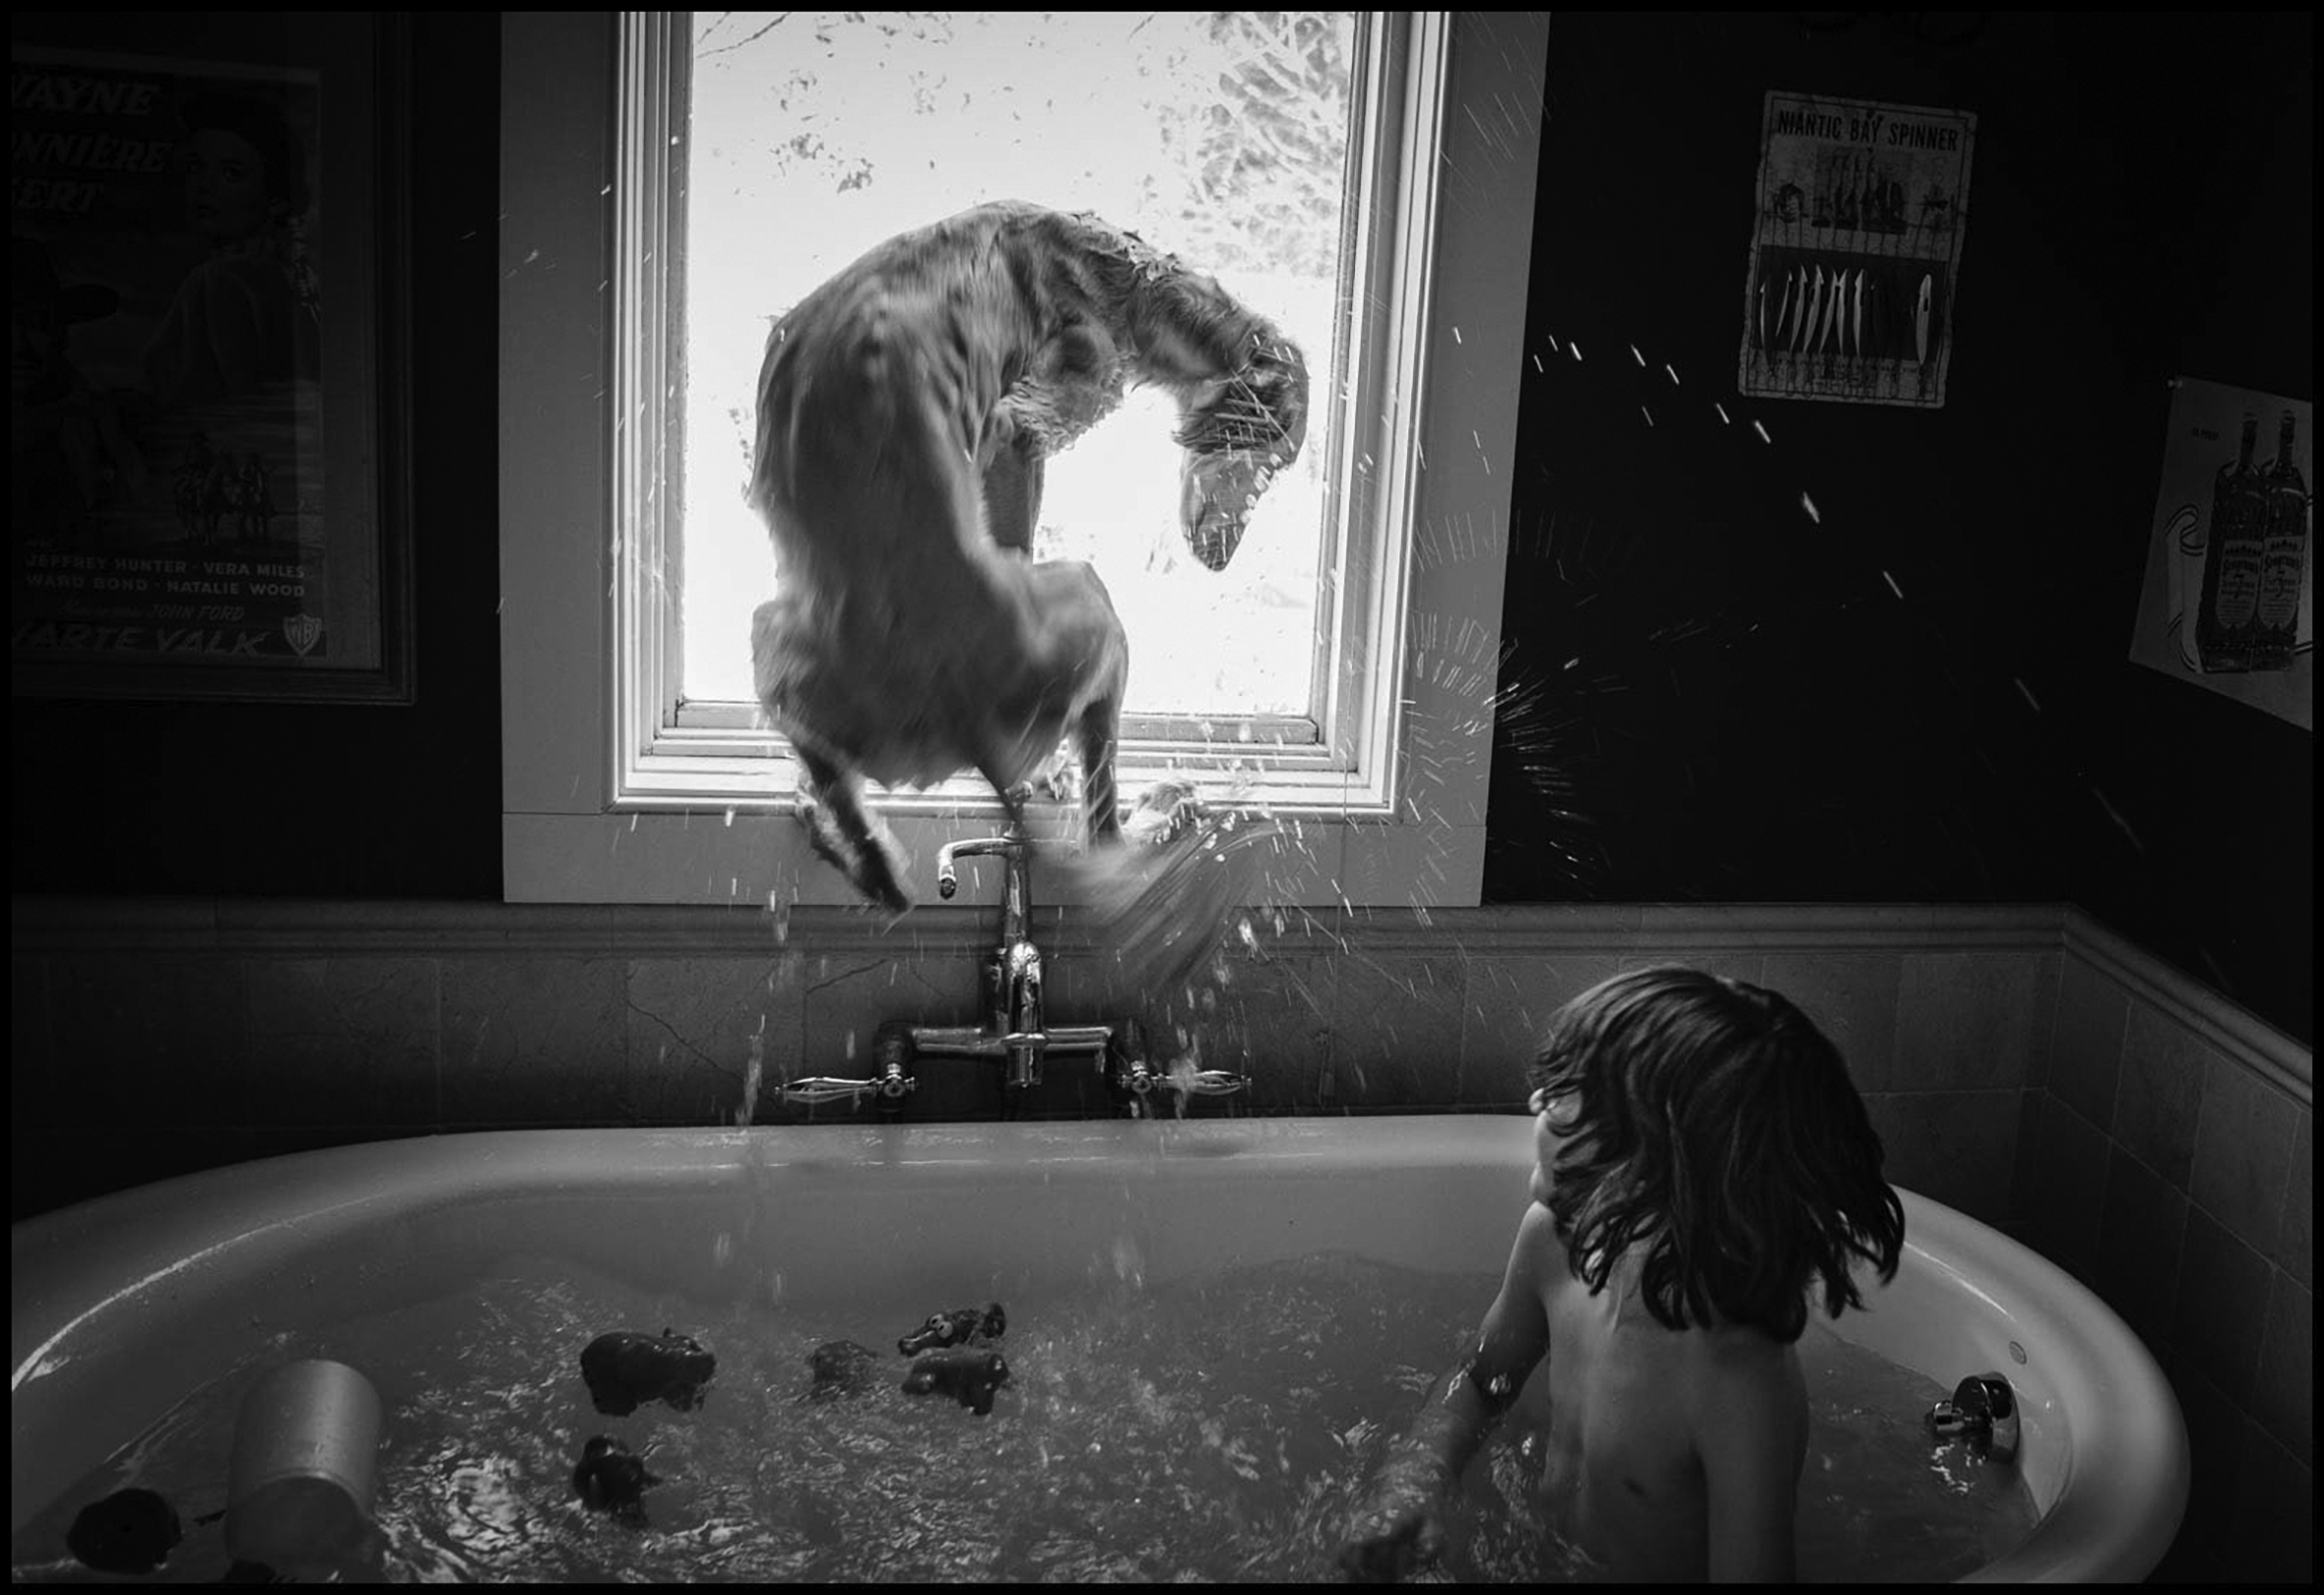 A large, slender dog jumps out of a freestanding bathtub in front of a window and splashes water everywhere. The water droplets in the air show movement. A child sits in the tub and looks at the back of the dog as toys float on the churning water.